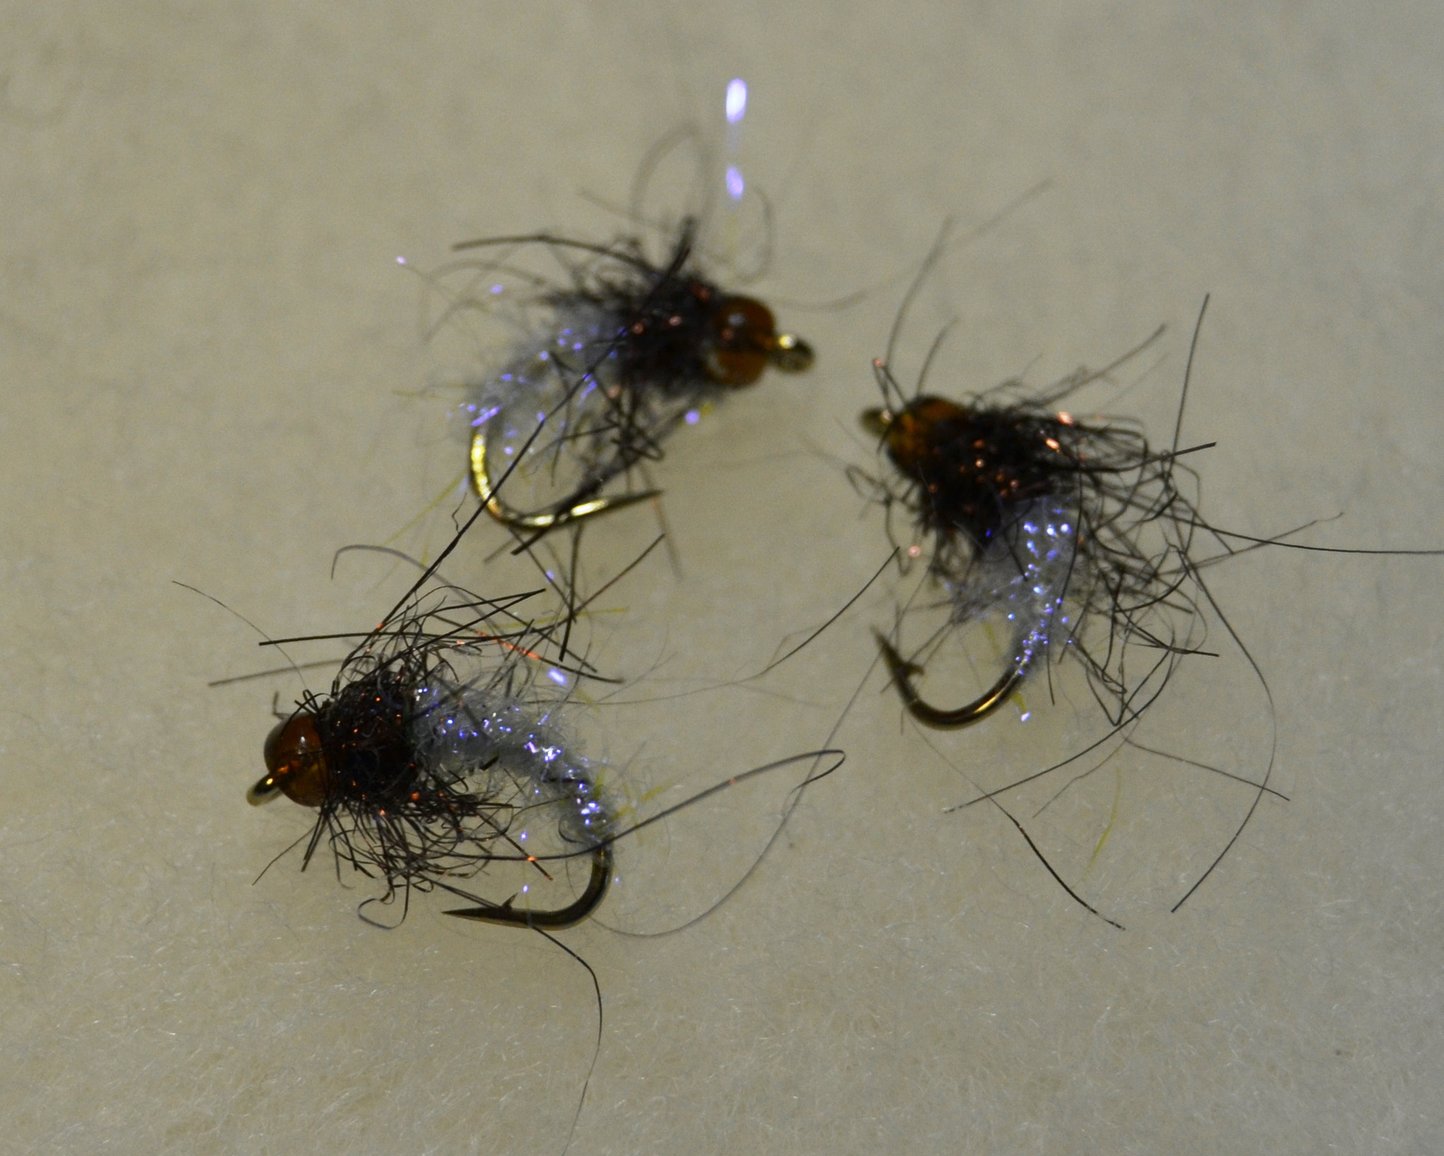 40  Ken's Ice Caddis, Ice Caddis Pupa, Caddis Pupa, Caddis Nymph 40 FLY SELECTION